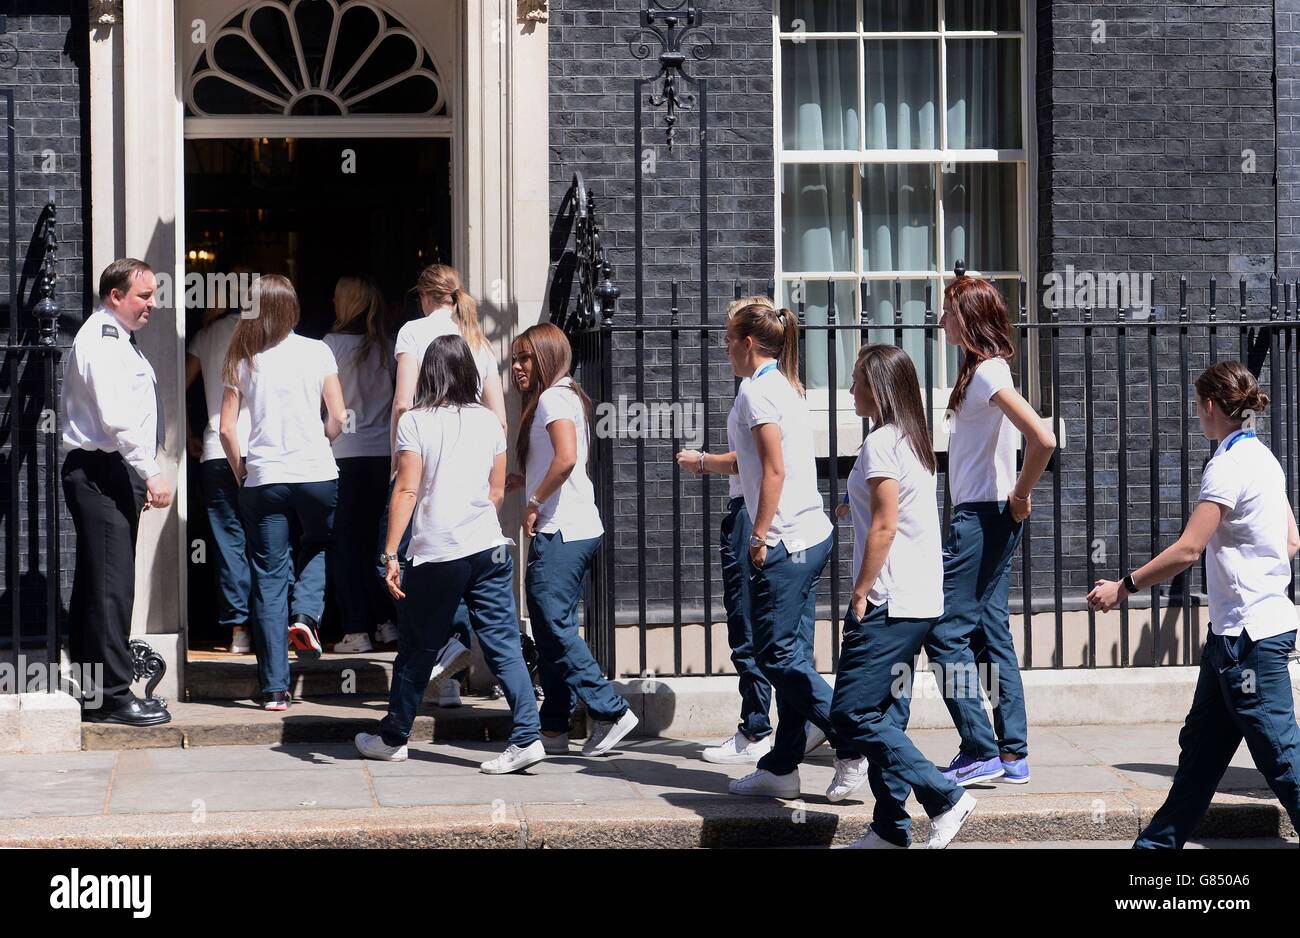 Members of England Women's Football team arrive for a reception at 10 Downing Street, London. Stock Photo